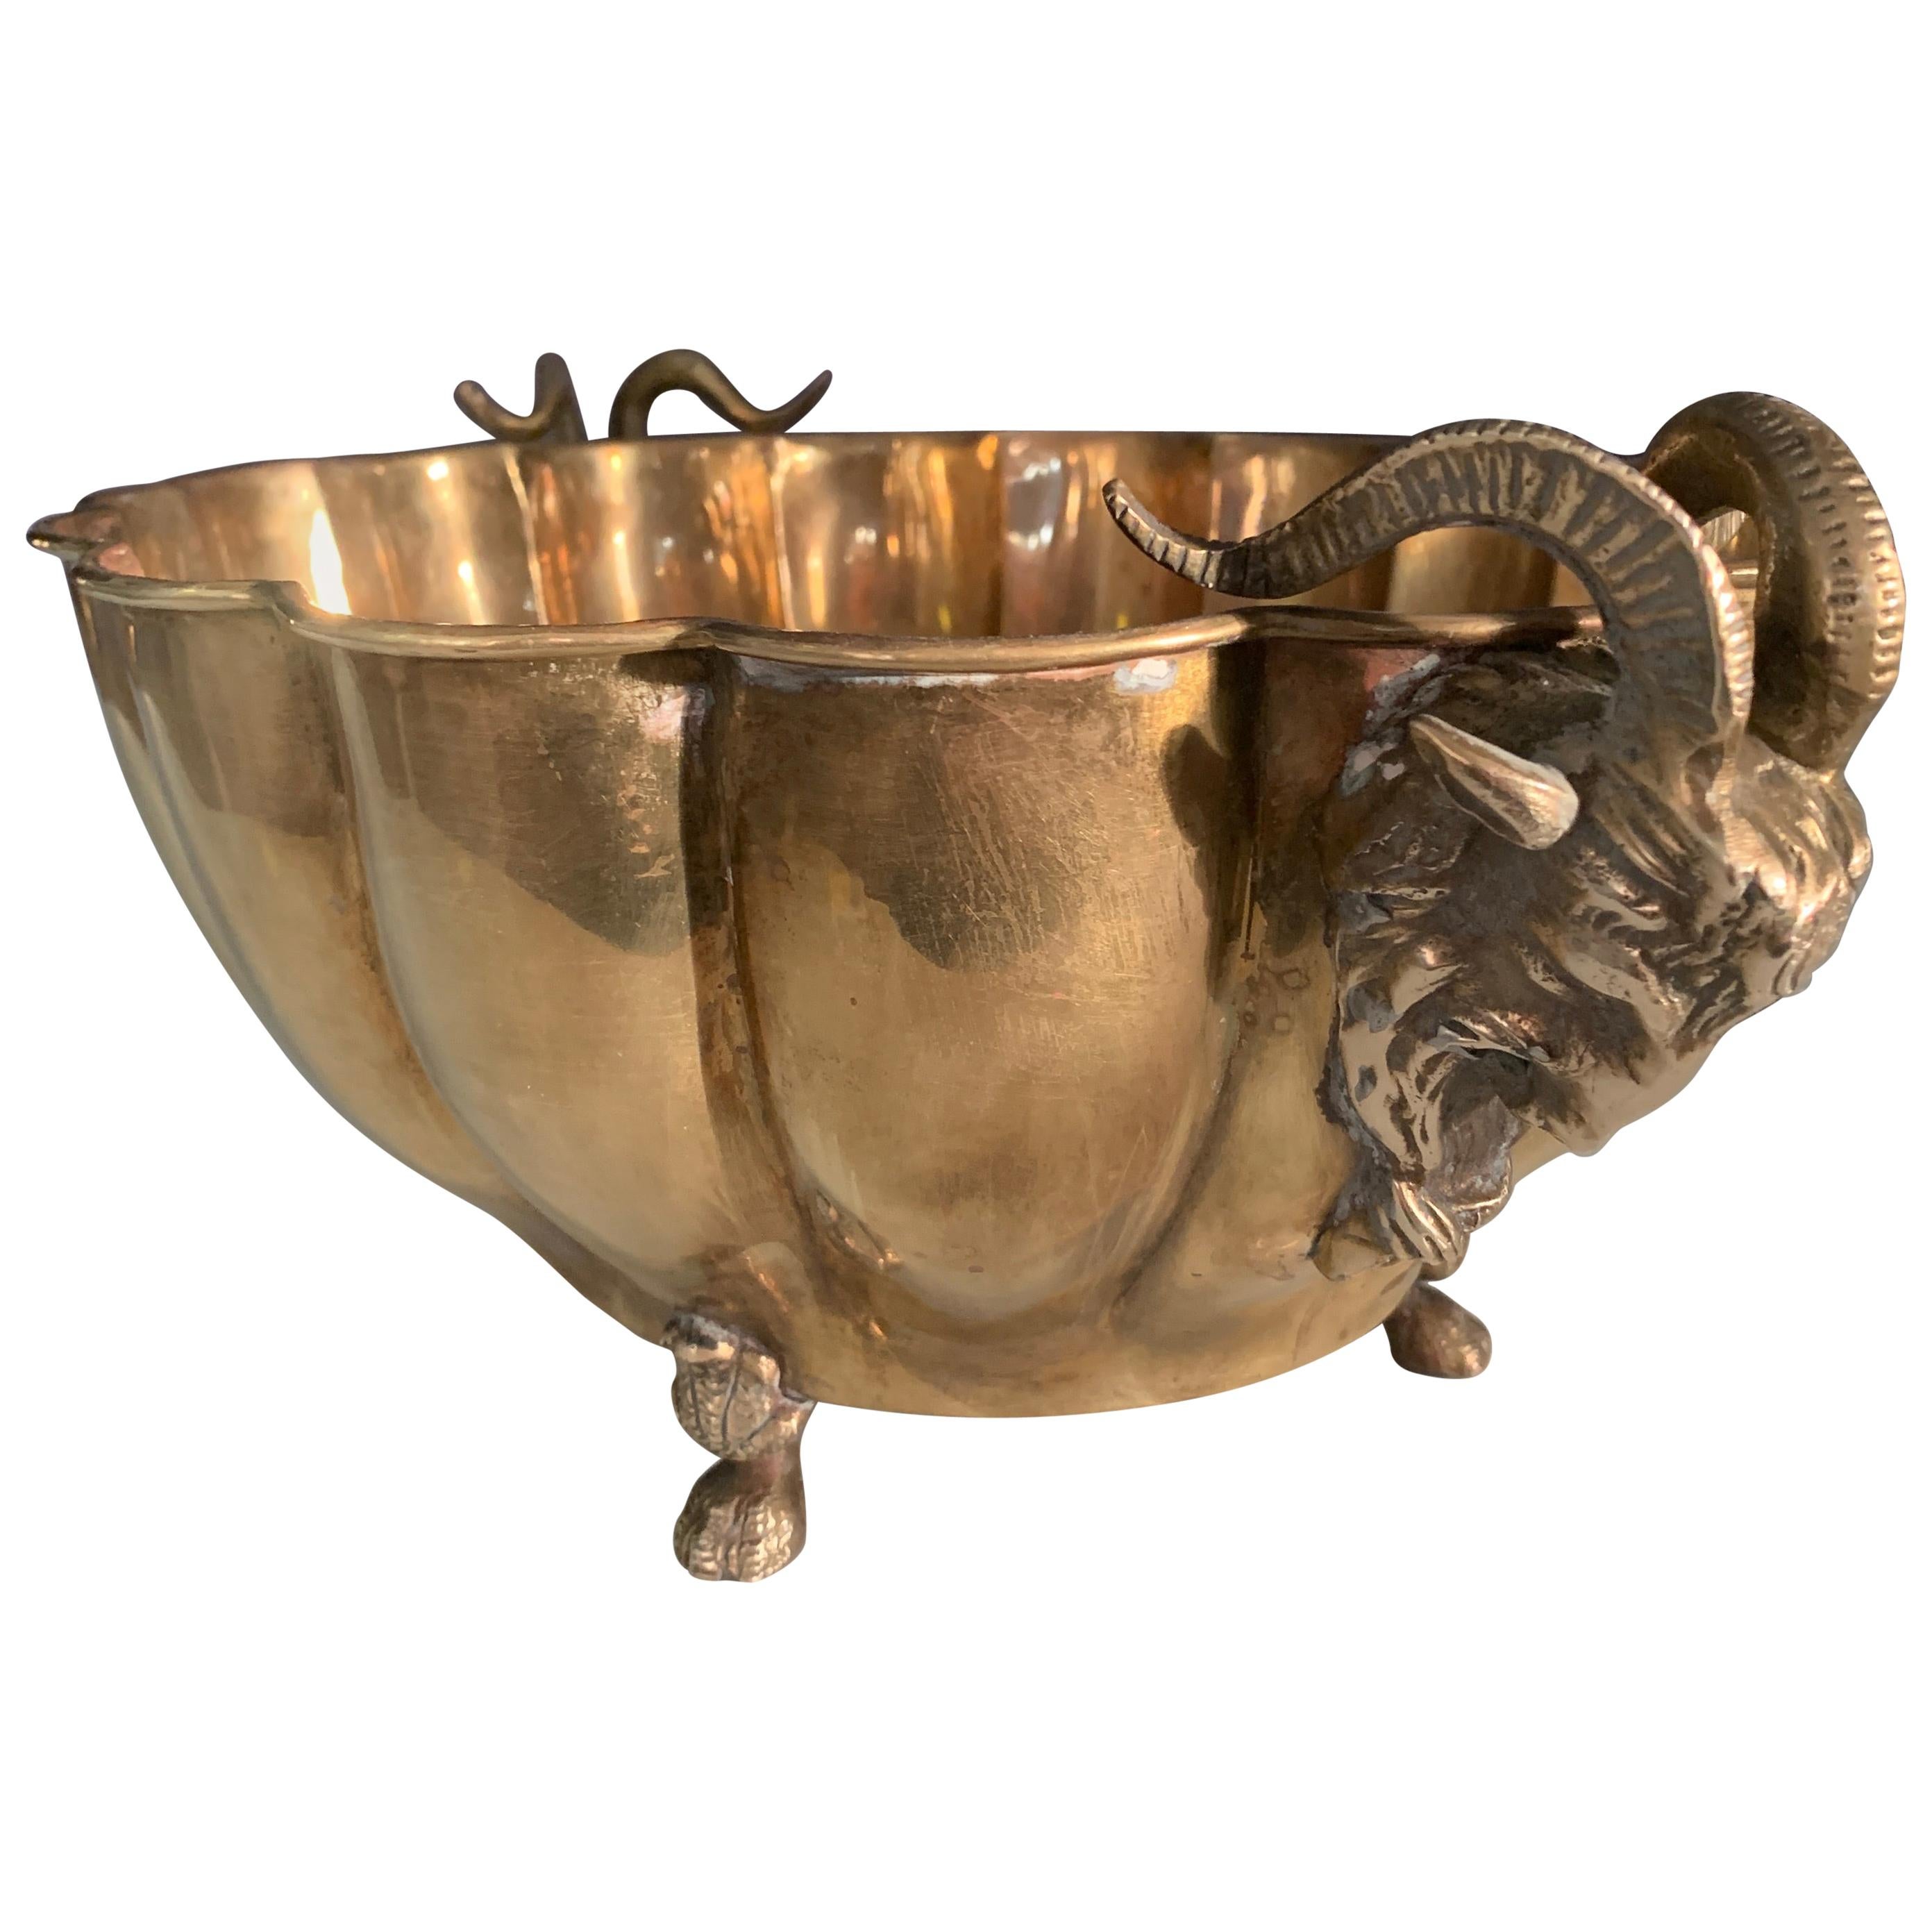 Brass Jardinière with Rams Head Handles and Paw Feet